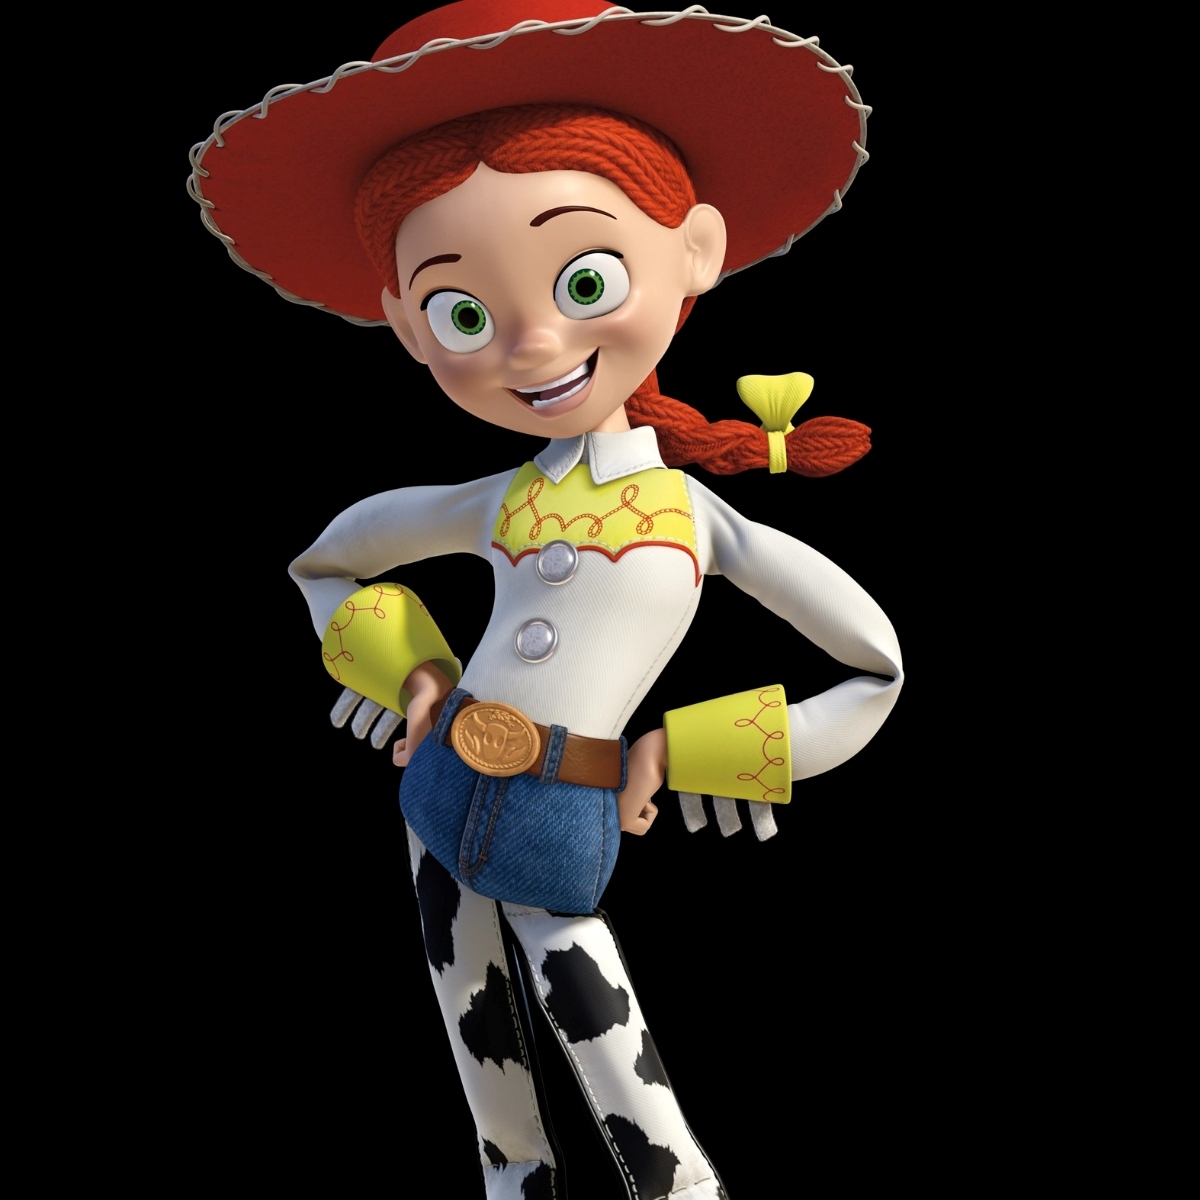 11 Facts About Jessie (Toy Story) 